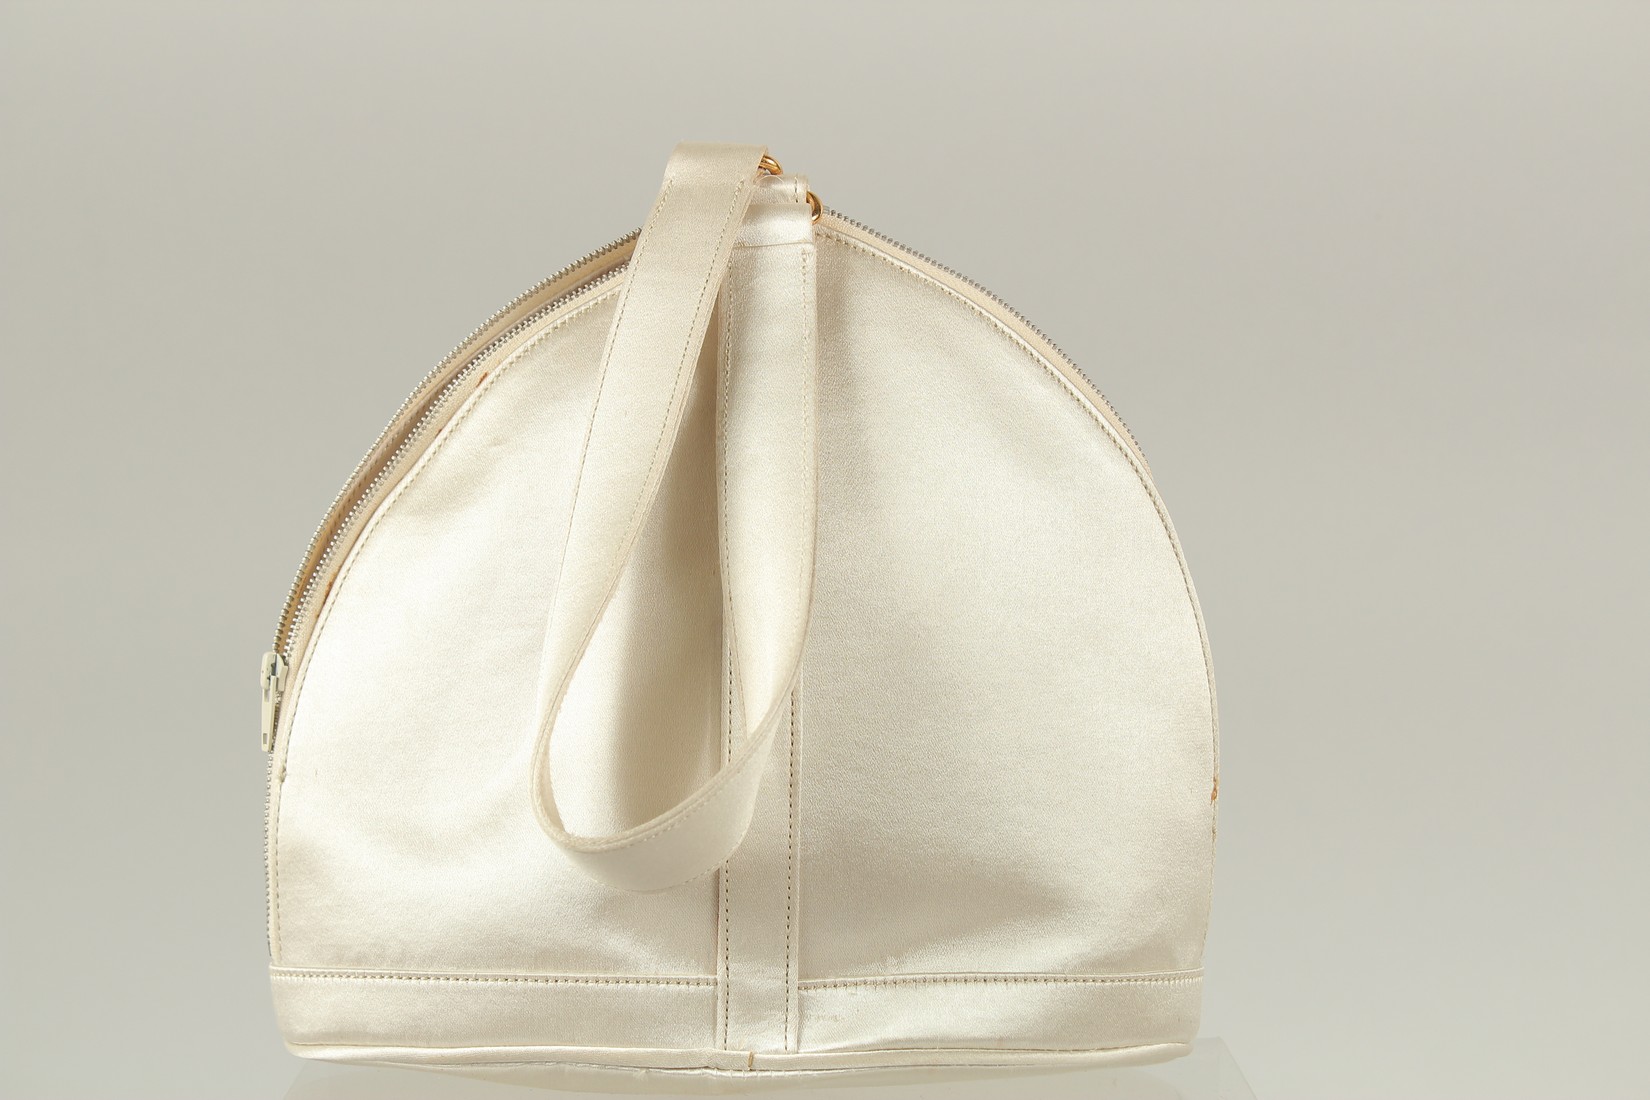 A RENAUD PELLEGRINO, PARIS, WHITE SILK BAG with carrying handles. 20cms long x 18cms high. - Image 2 of 3